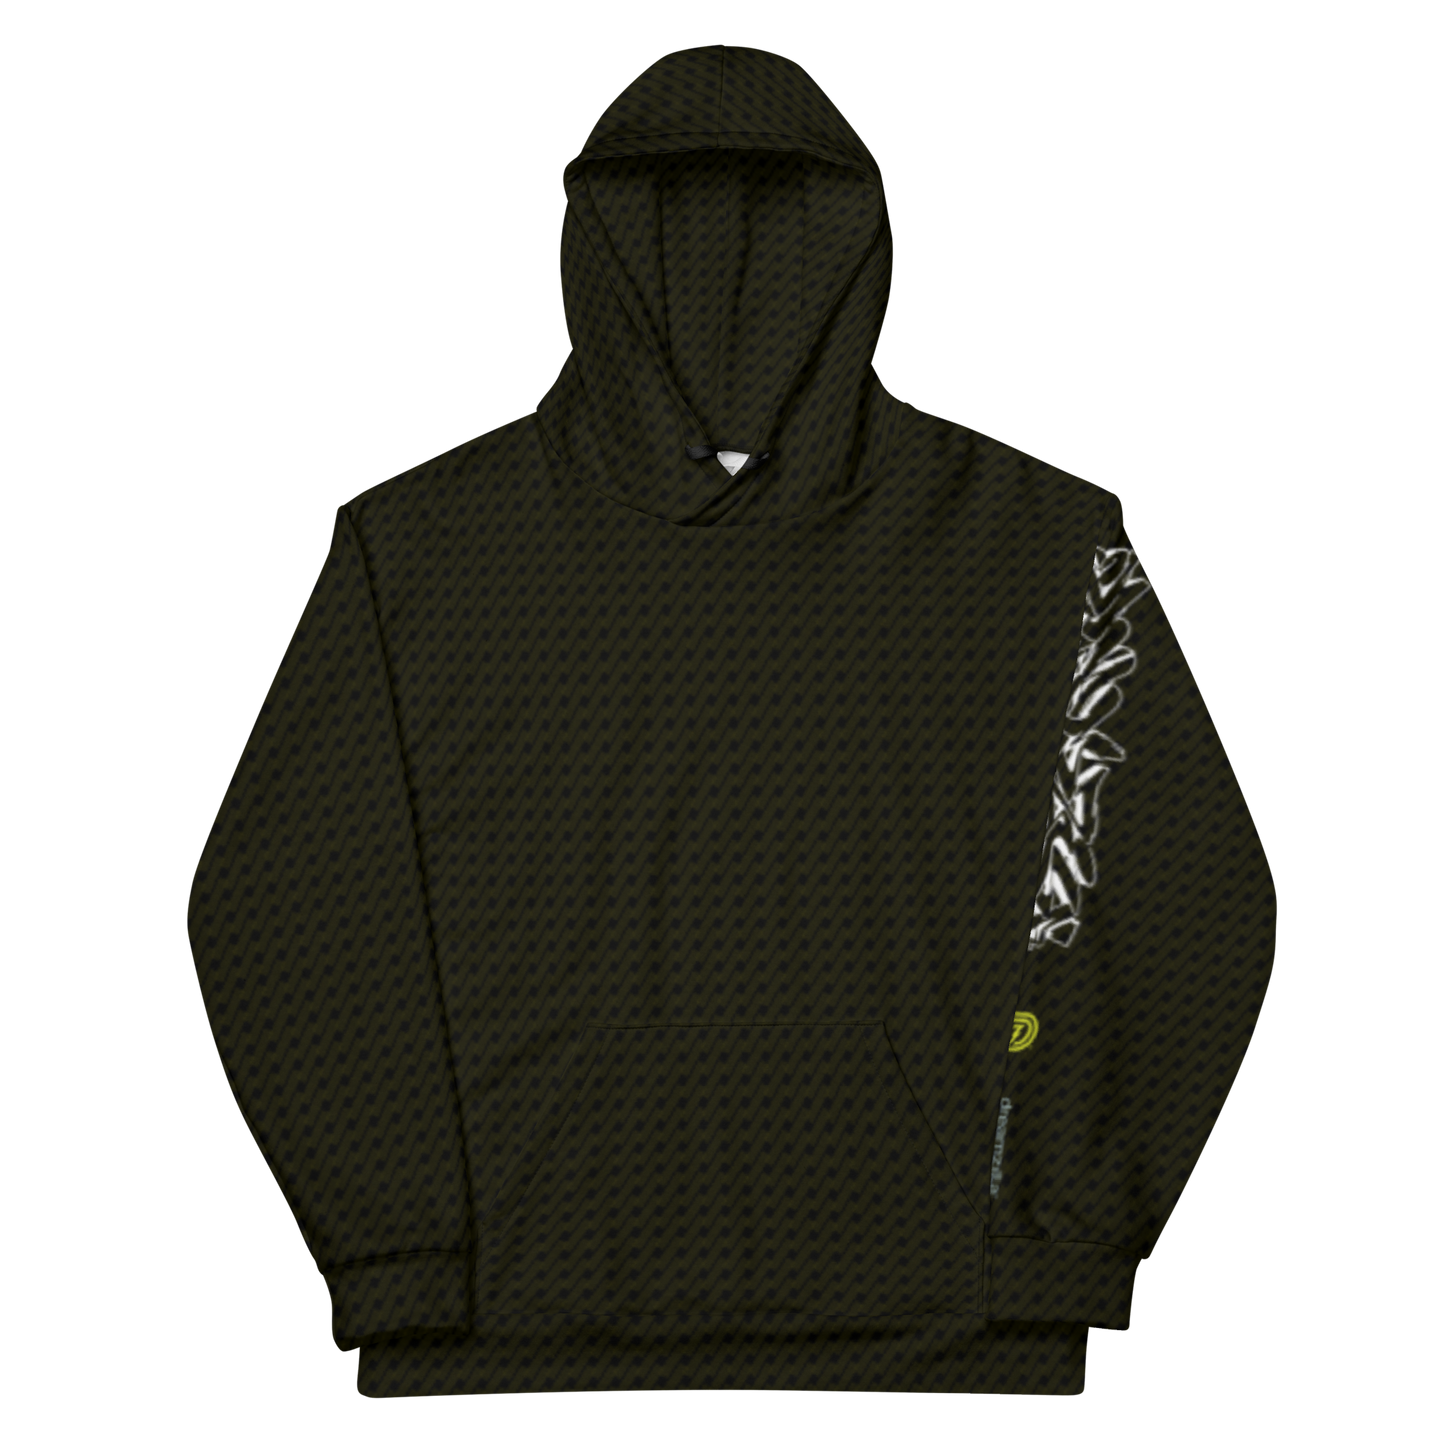 Graffiti Wildstyle by Sanitor Unisex Hoodie with Hood up